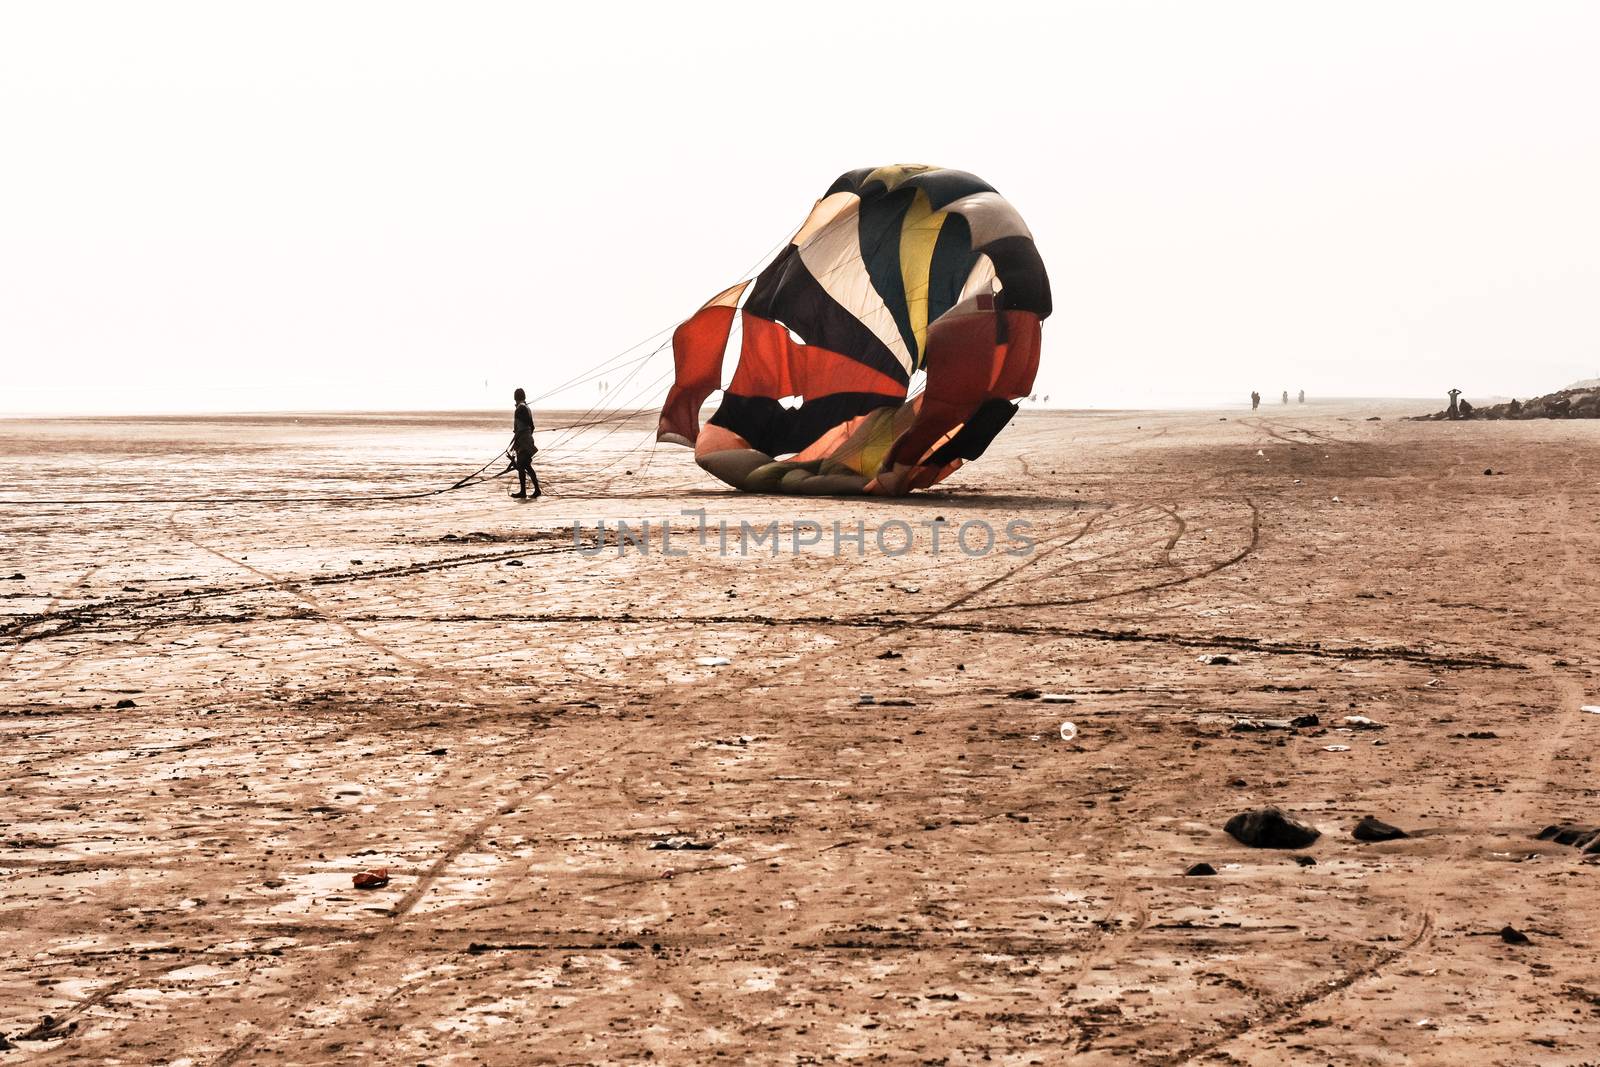 Skydiver with orange and yellow parachute runs after landing in Dona Paula Beach, near Colva and Vagator Beach Goa against sky and sea water. Paragliding parachuting is an extreme sport of recreation.